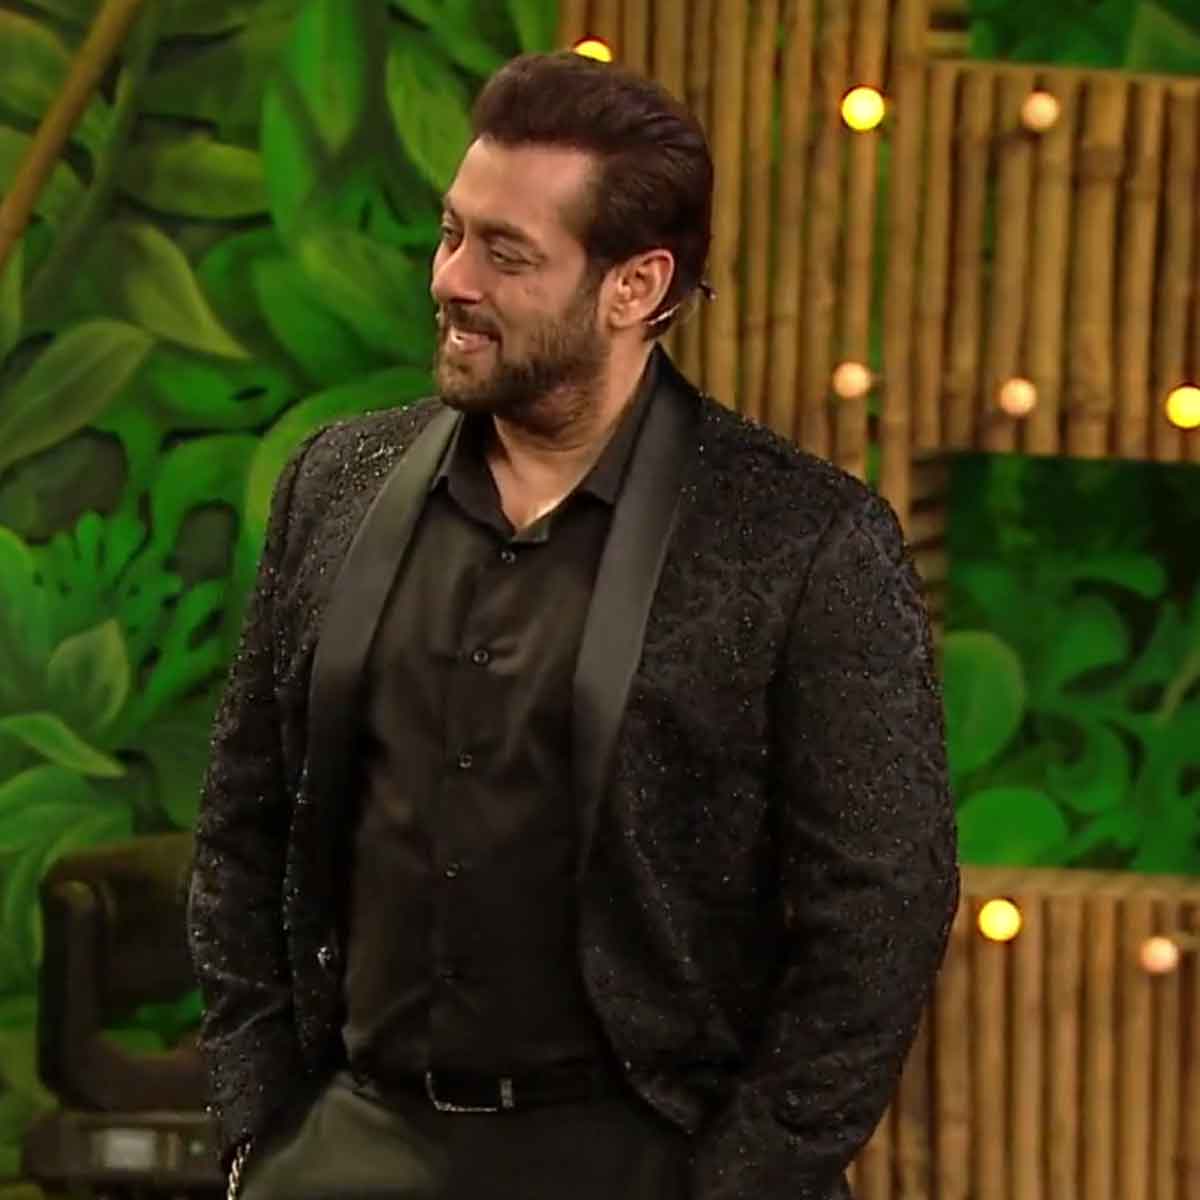 Bigg Boss 15 Finale EXCLUSIVE: Tarot card reader predicts who is likely to win Salman Khan’s show